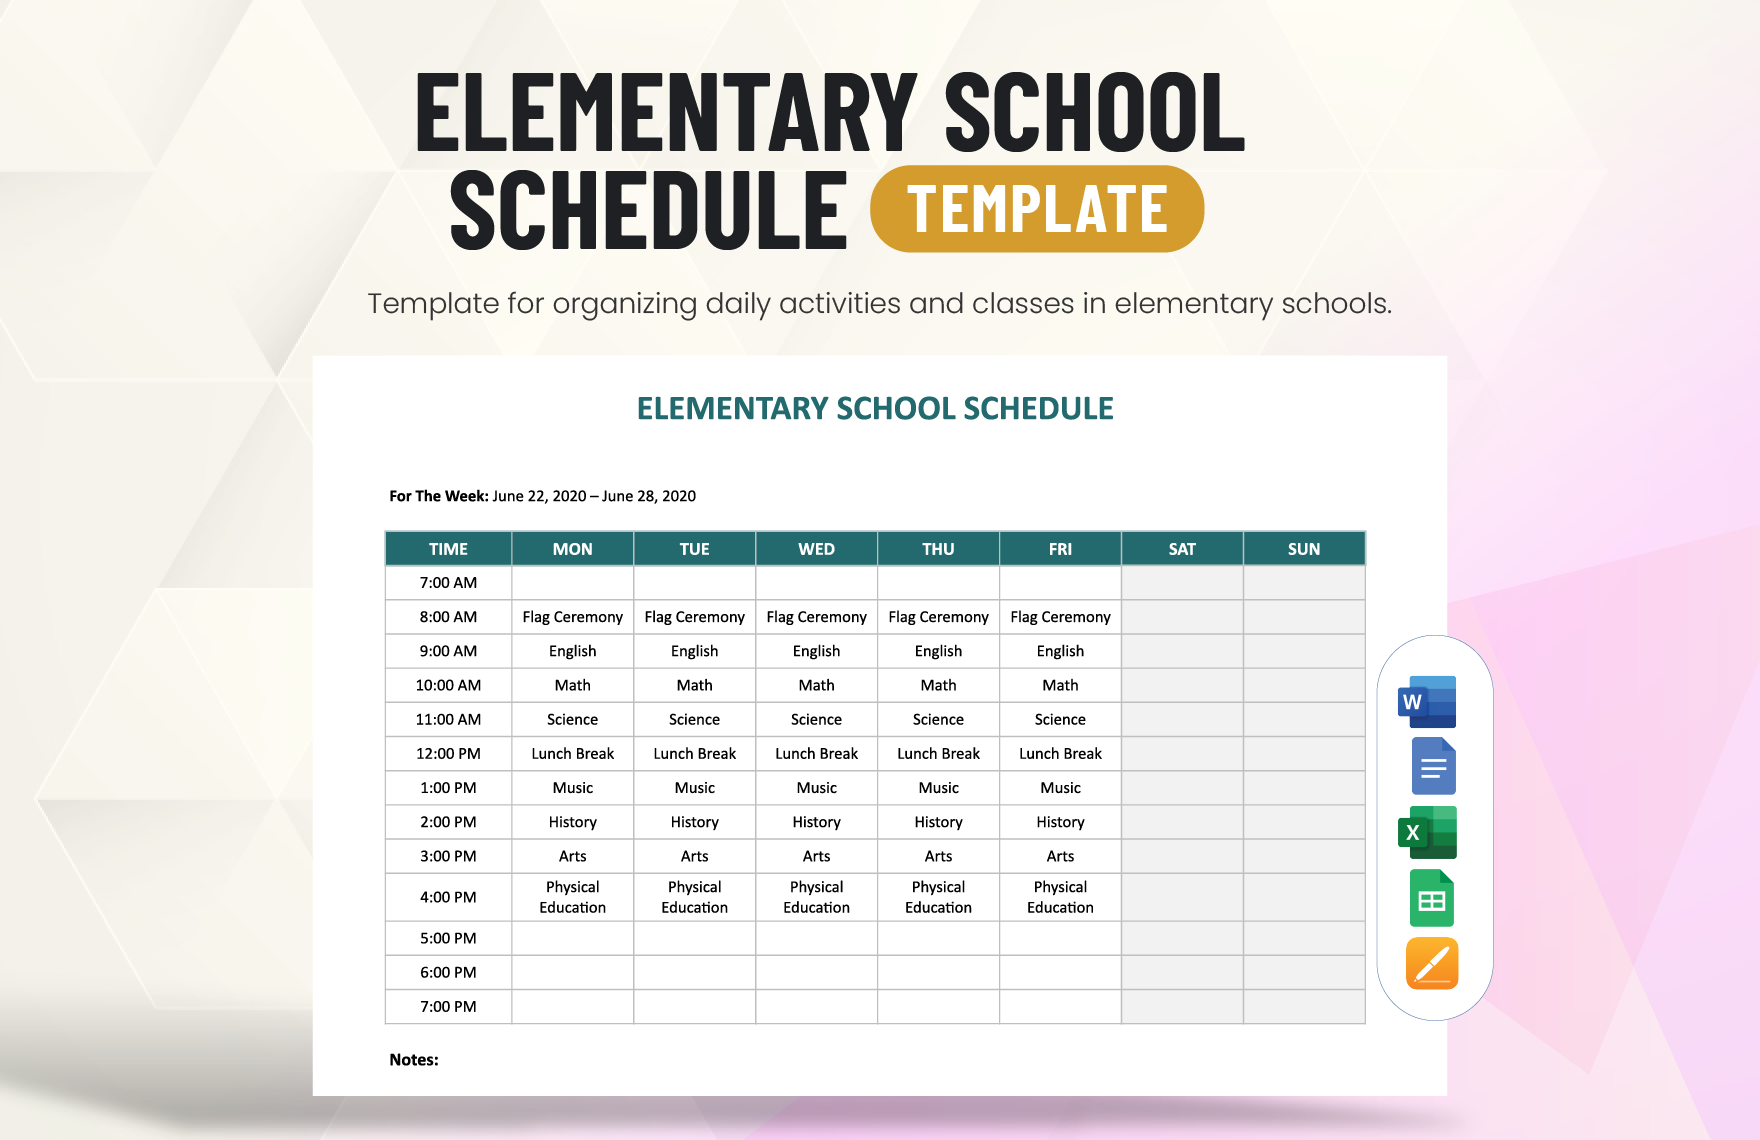 Elementary School Schedule Template in Word, Google Docs, Excel, Google Sheets, Apple Pages